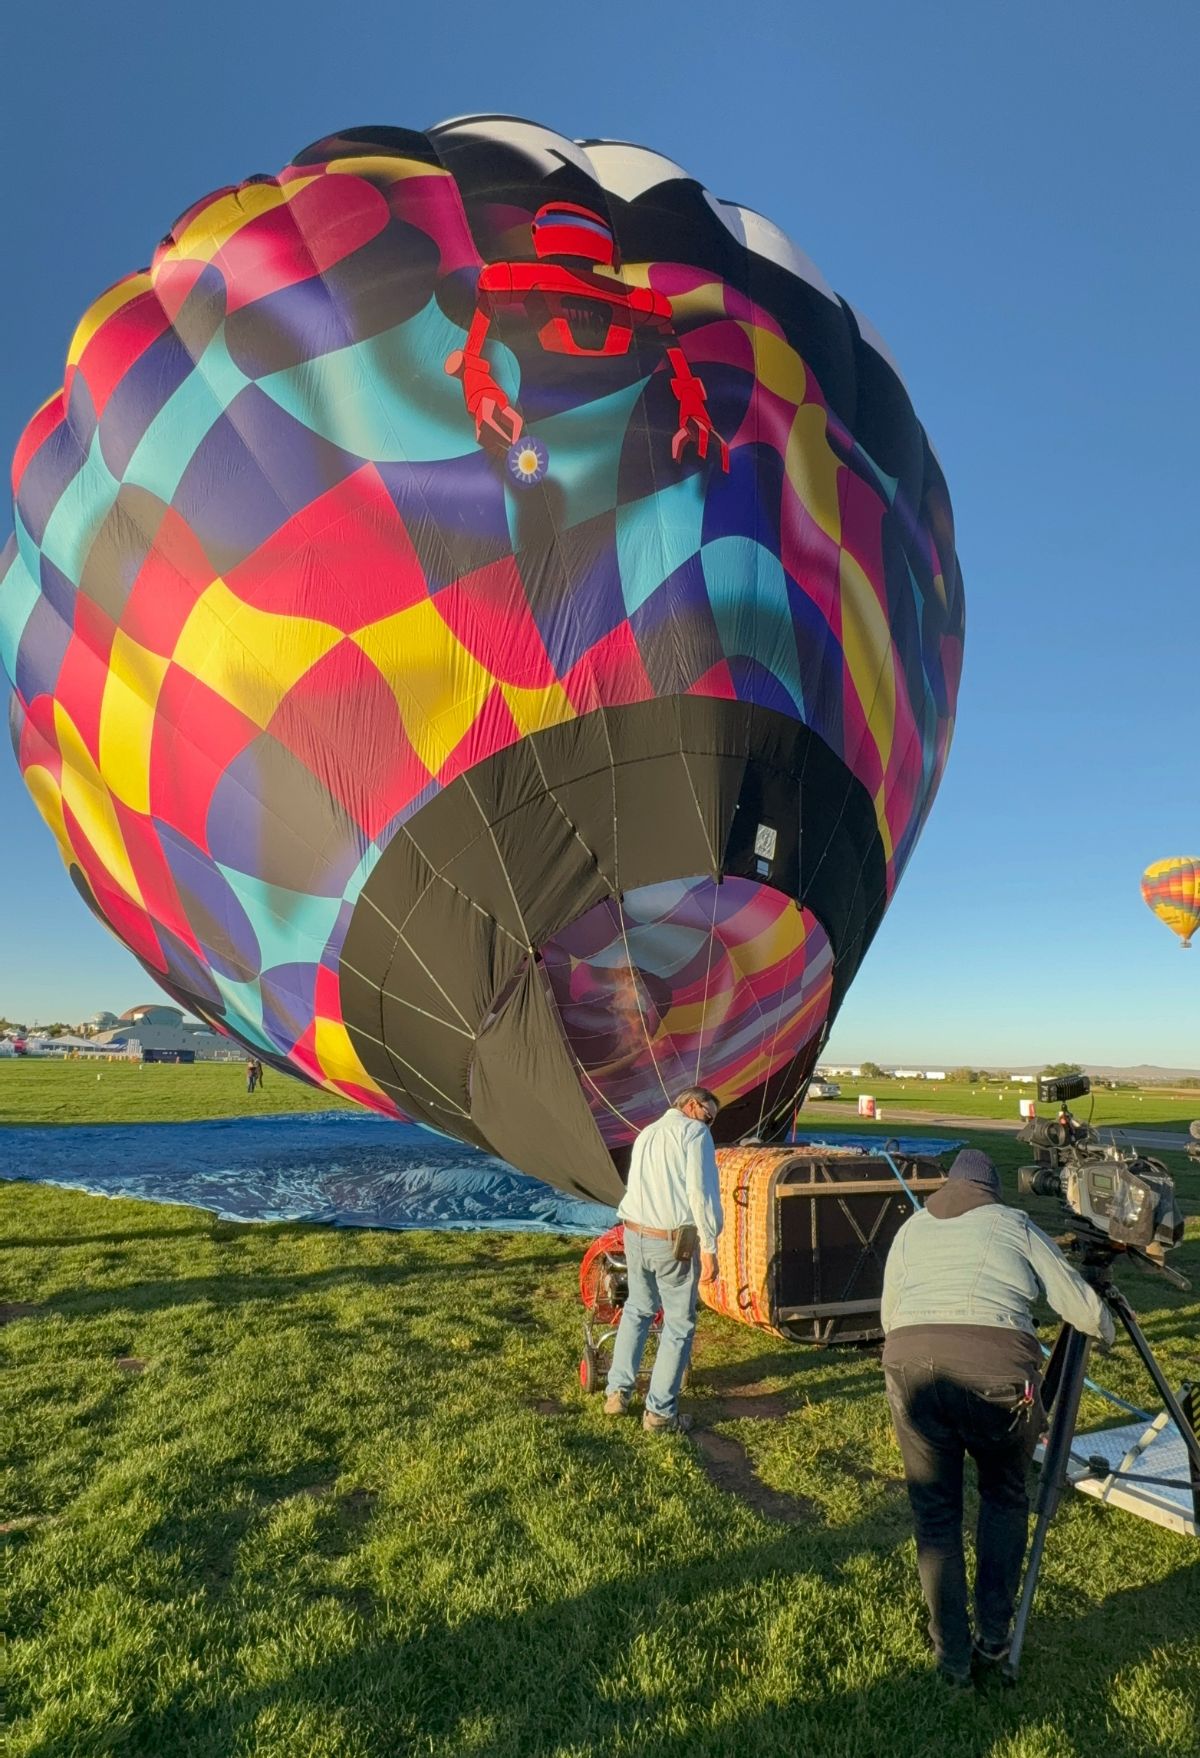 A group of people are filming a hot air balloon.